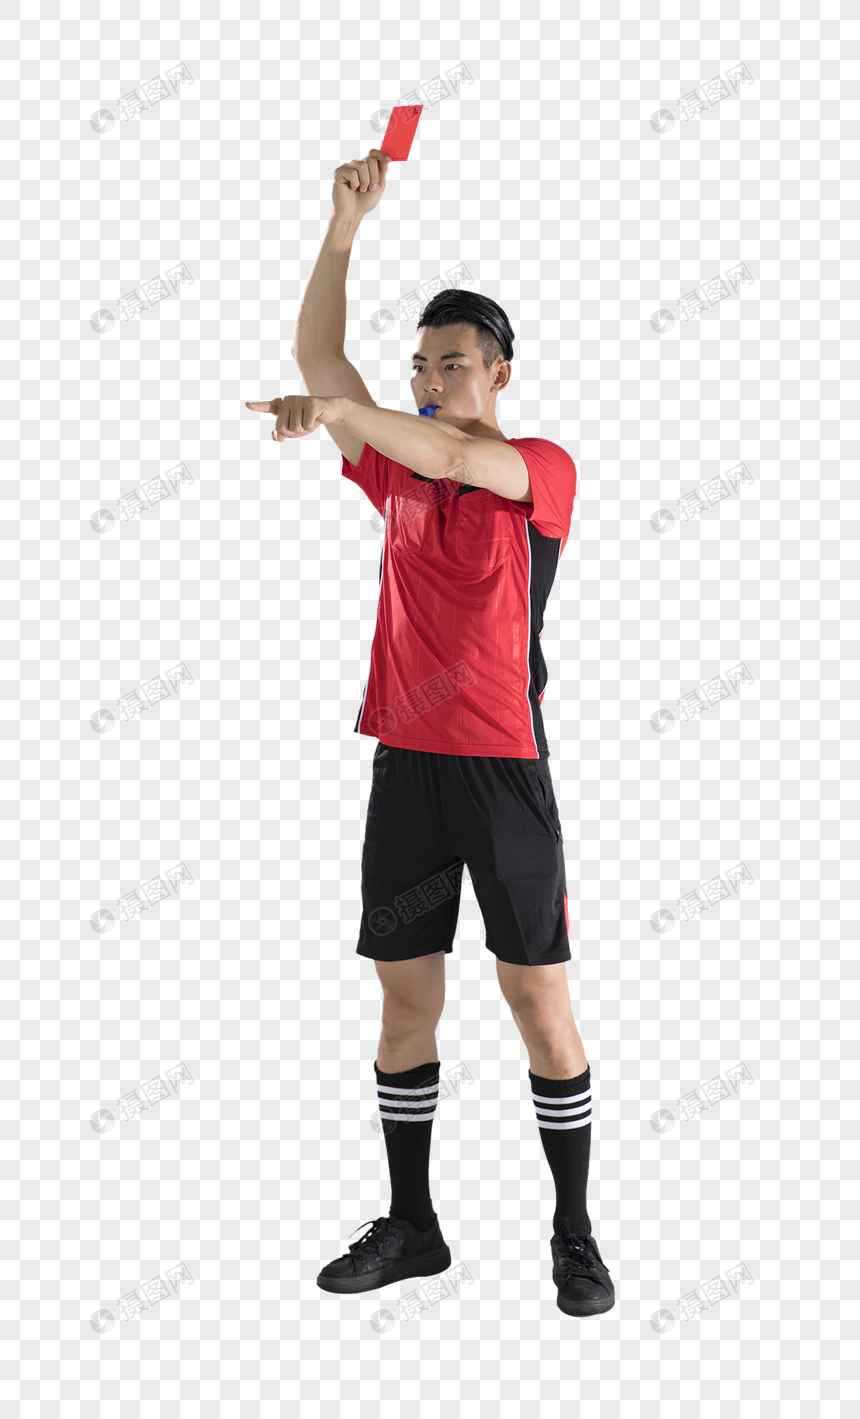 Football Referee PNG Image & PSD File Free Download - Lovepik Pertaining To Football Referee Game Card Template